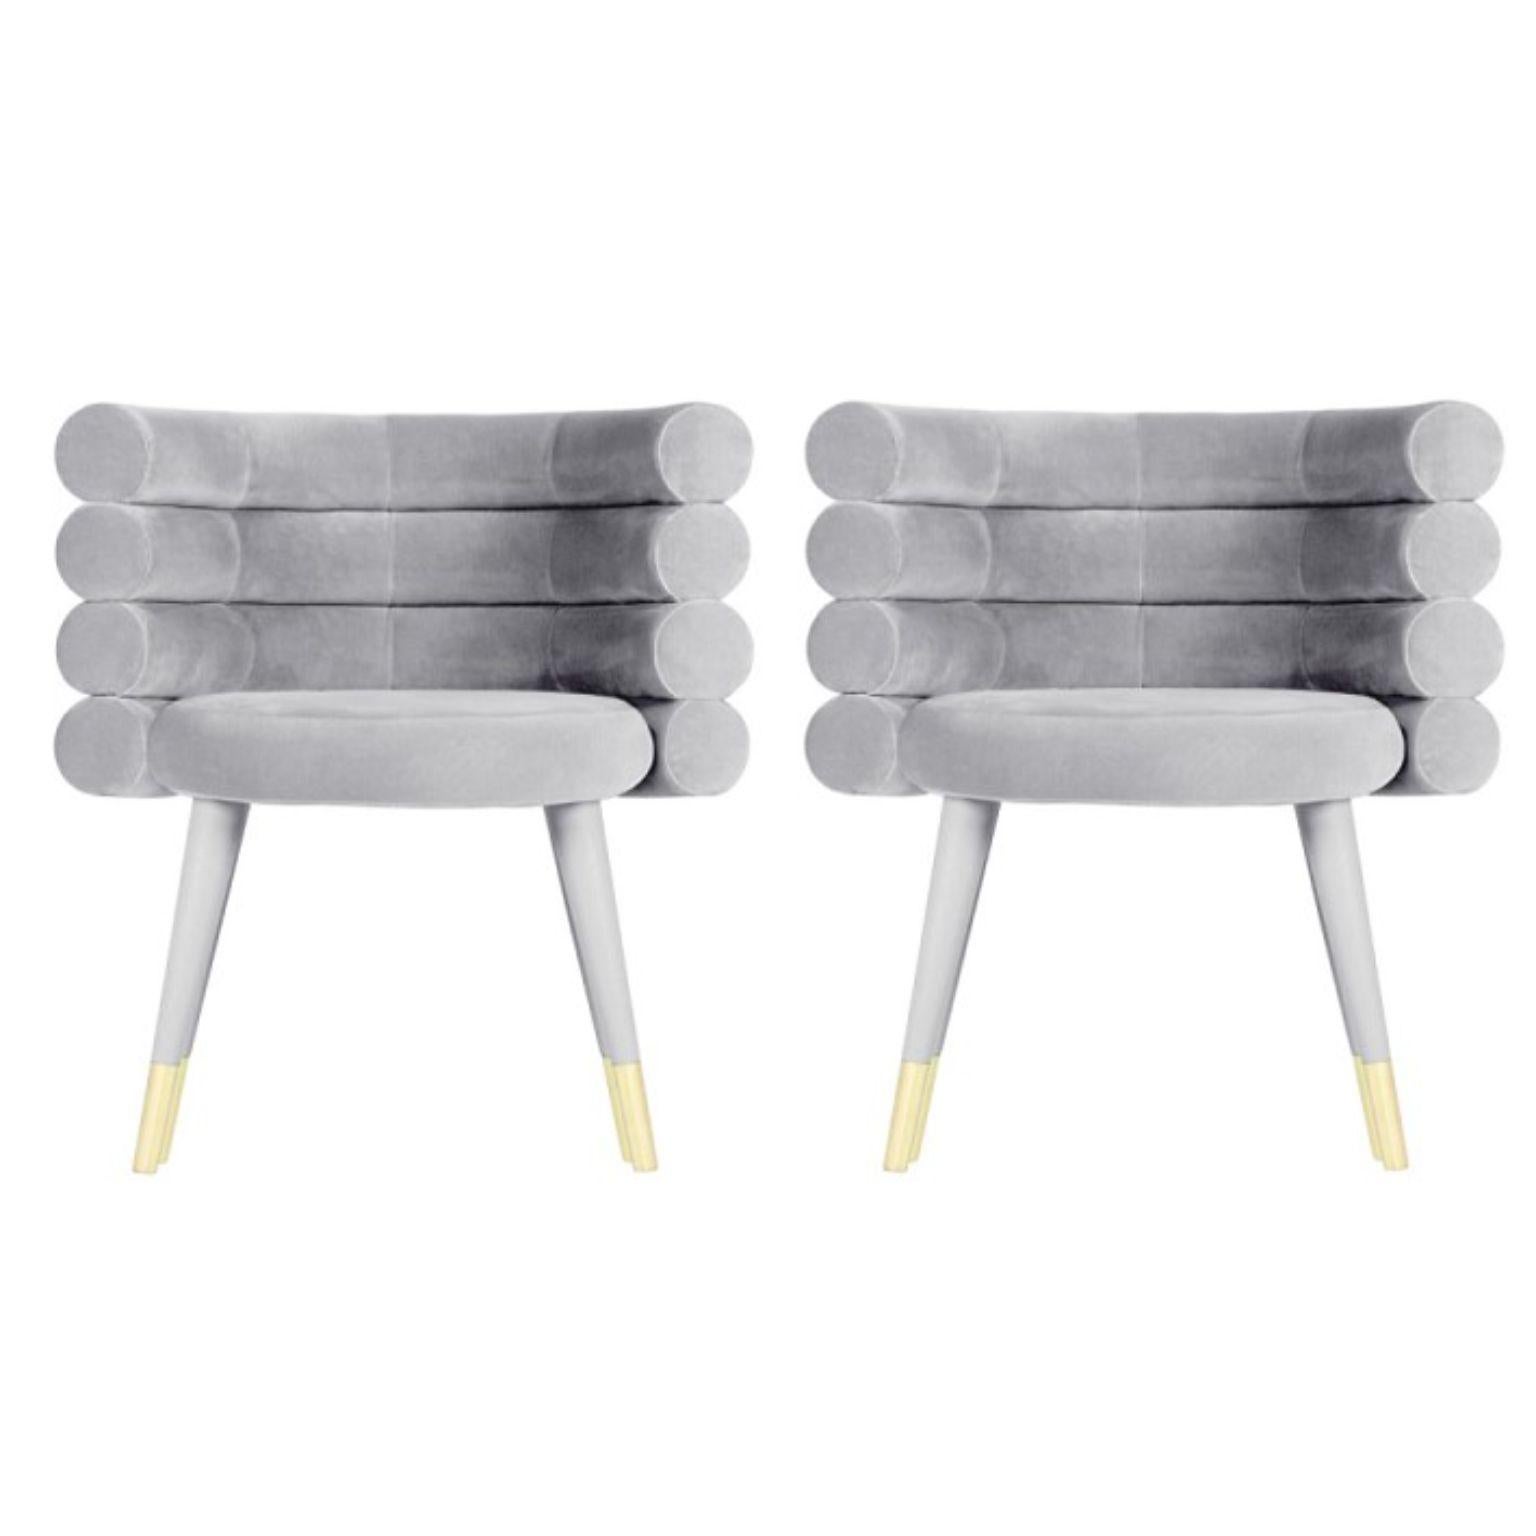 Set of 2 grey Marshmallow dining chairs, Royal Stranger
Dimensions: 78 x 70 x 60 cm
Materials: Velvet upholstery and brass
Available in: Mint green, light pink, royal green and royal red

Royal Stranger is an exclusive furniture brand